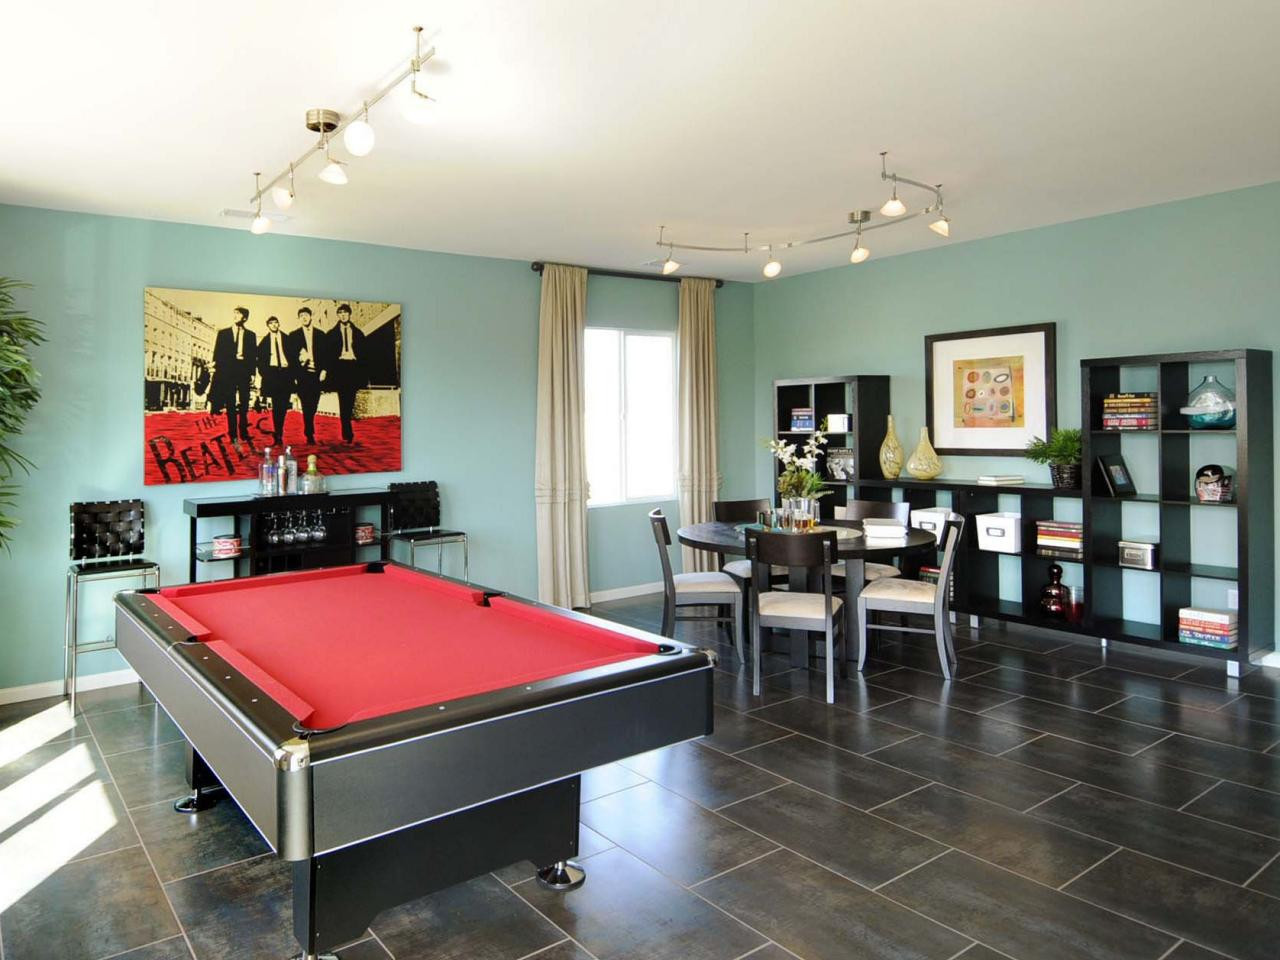 Kids Game Room Decor
 A Game Room for Adult That Will Make Your Leisure Time